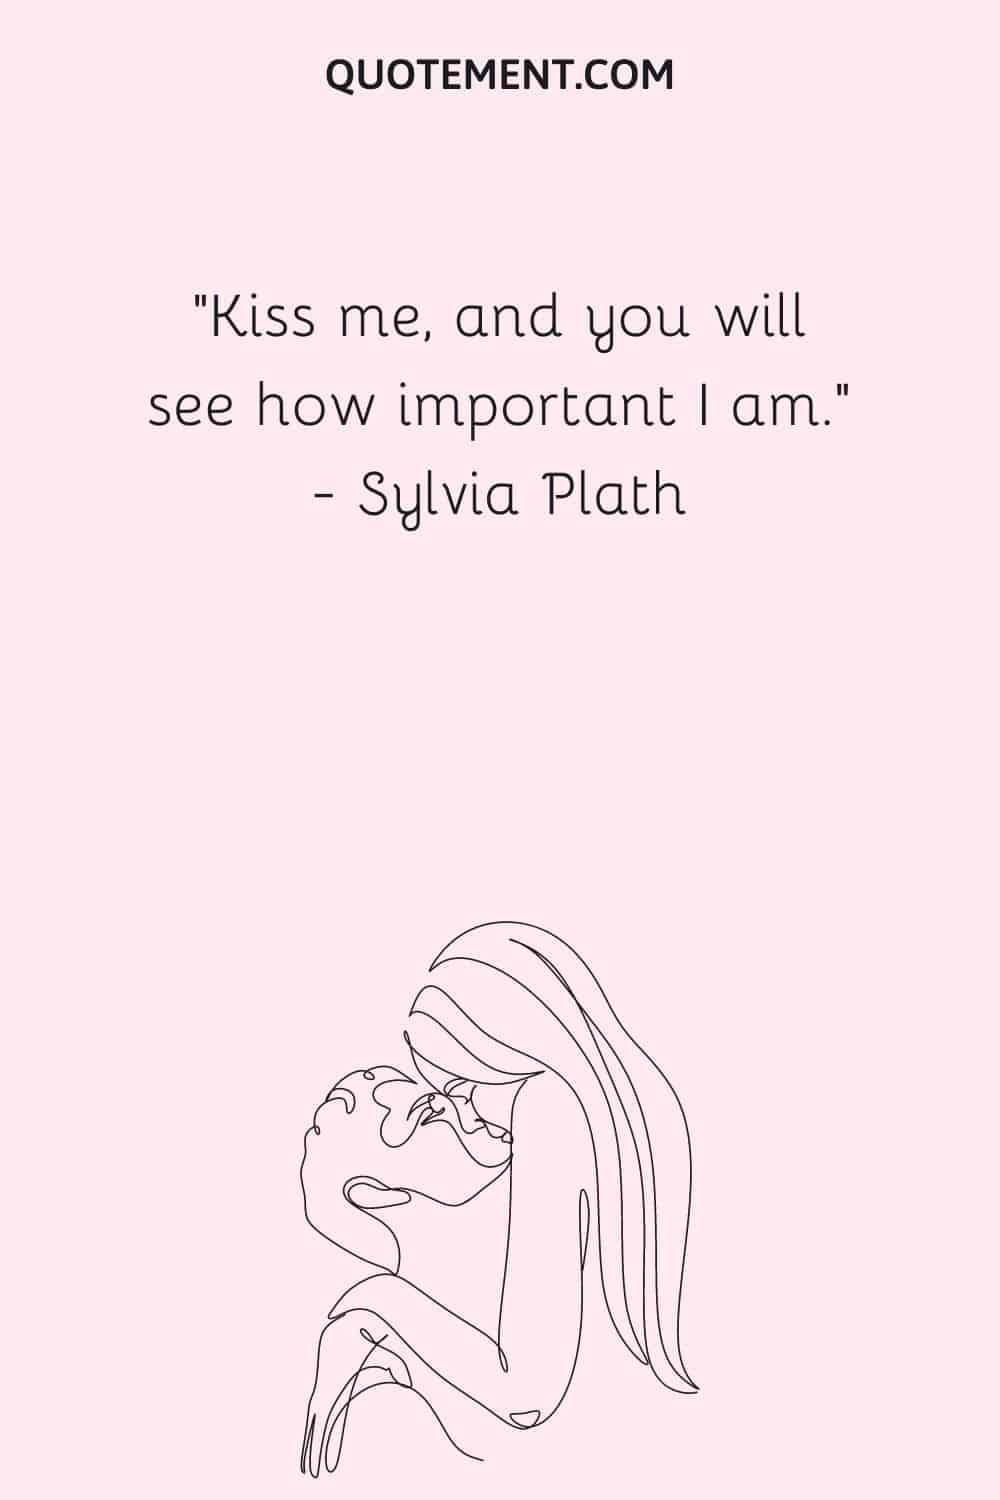 Kiss me, and you will see how important I am. ― Sylvia Plath